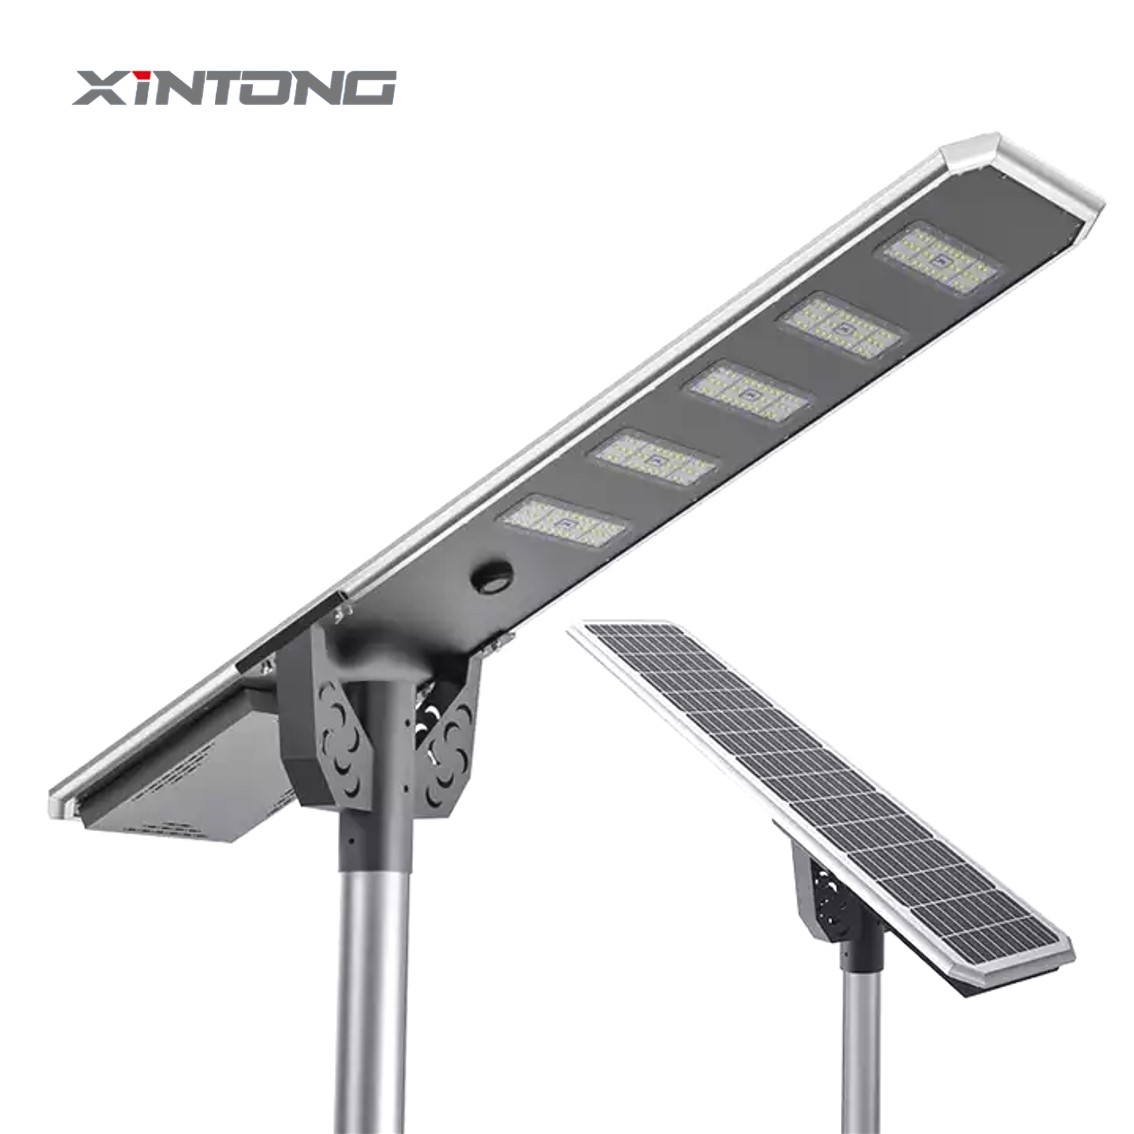 Revolutionary LED Street Lighting Offers Energy-Efficient Solution for Cities